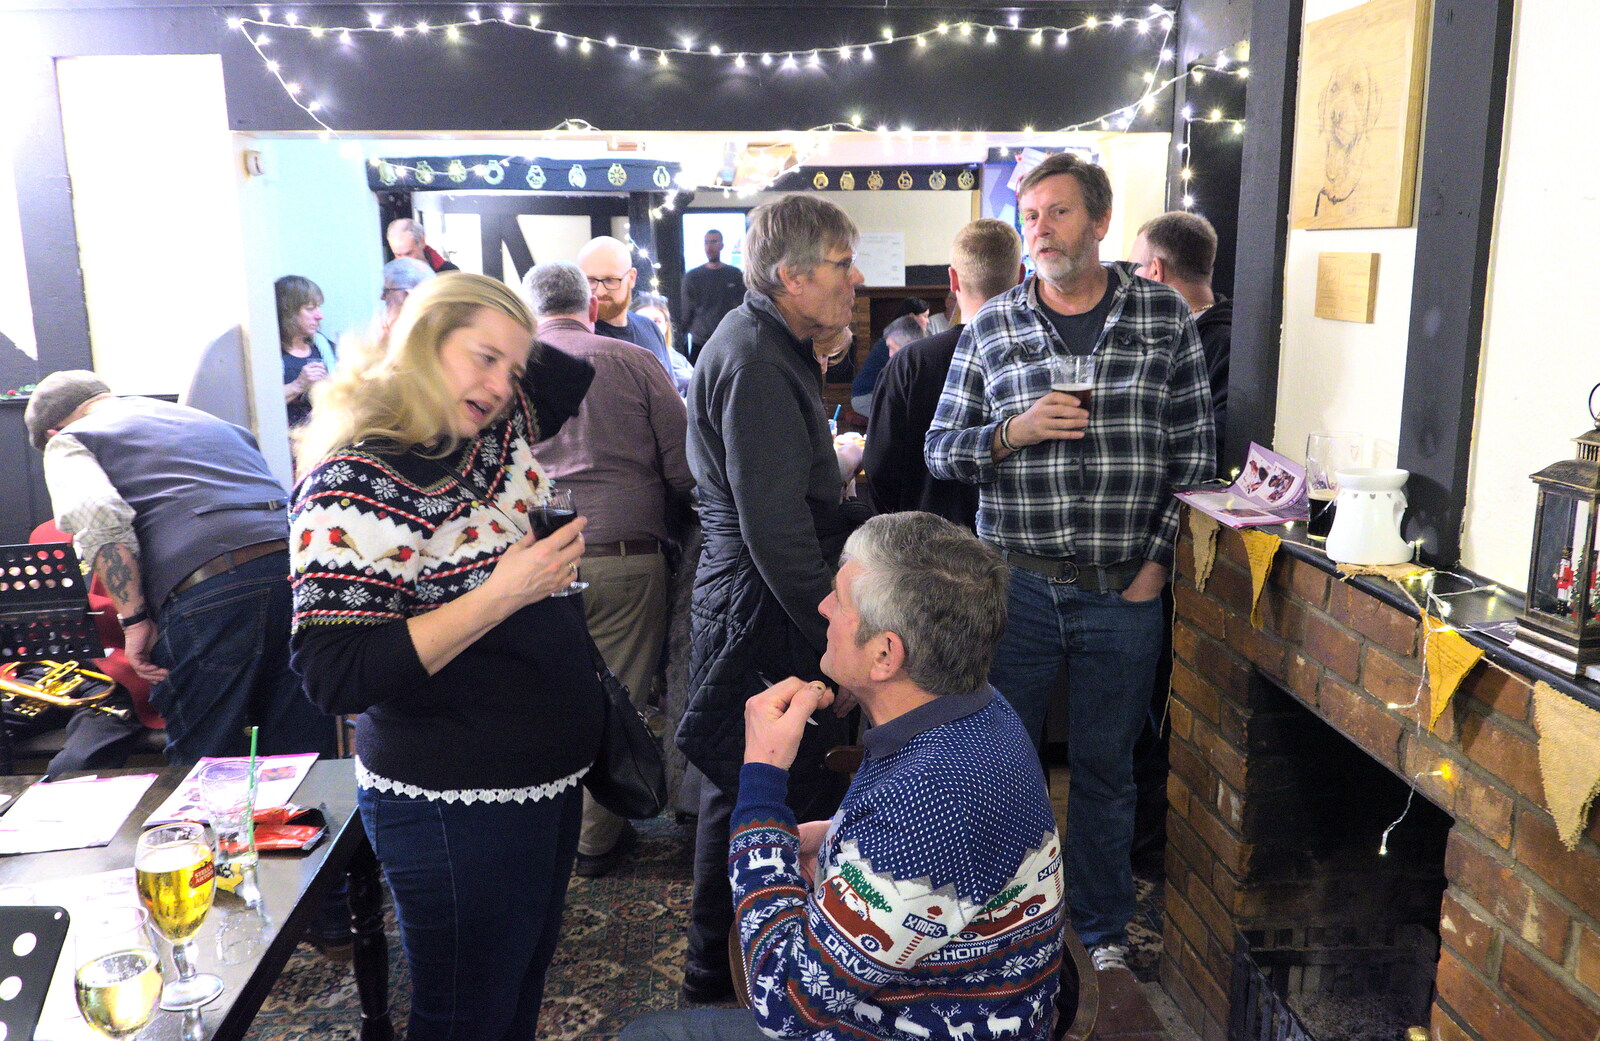 More chatting in the Cherry Tree from The Gislingham Silver Band at Thornham and Yaxley, Suffolk - 19th December 2022